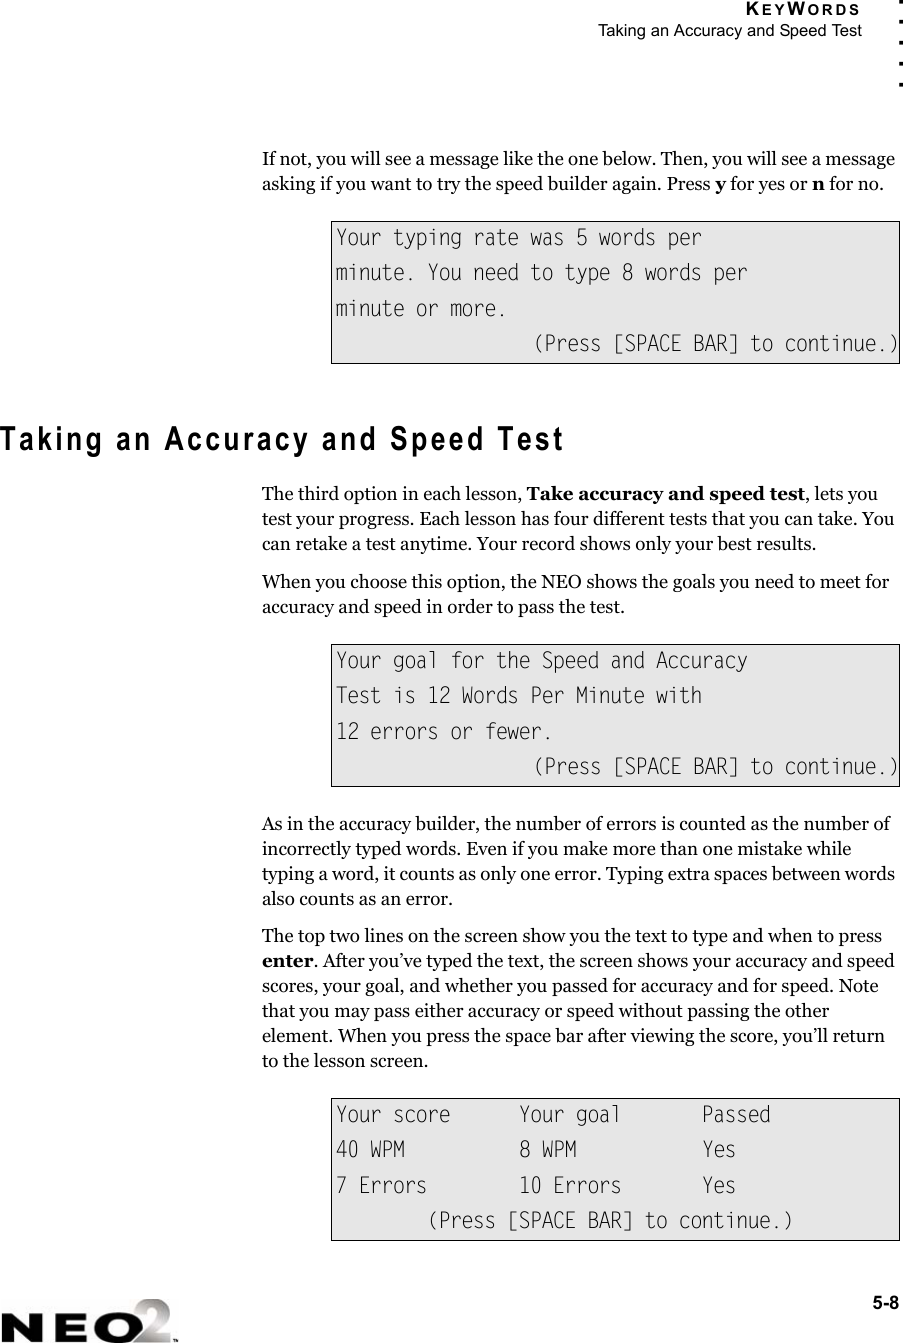 KEYWORDSTaking an Accuracy and Speed Test5-8. . . . .If not, you will see a message like the one below. Then, you will see a message asking if you want to try the speed builder again. Press y for yes or n for no.Taking an Accuracy and Speed TestThe third option in each lesson, Take accuracy and speed test, lets you test your progress. Each lesson has four different tests that you can take. You can retake a test anytime. Your record shows only your best results.When you choose this option, the NEO shows the goals you need to meet for accuracy and speed in order to pass the test.As in the accuracy builder, the number of errors is counted as the number of incorrectly typed words. Even if you make more than one mistake while typing a word, it counts as only one error. Typing extra spaces between words also counts as an error.The top two lines on the screen show you the text to type and when to press enter. After you’ve typed the text, the screen shows your accuracy and speed scores, your goal, and whether you passed for accuracy and for speed. Note that you may pass either accuracy or speed without passing the other element. When you press the space bar after viewing the score, you’ll return to the lesson screen.Your typing rate was 5 words perminute. You need to type 8 words perminute or more.(Press [SPACE BAR] to continue.)Your goal for the Speed and AccuracyTest is 12 Words Per Minute with12 errors or fewer.(Press [SPACE BAR] to continue.)Your score Your goal Passed40 WPM 8 WPM Yes7 Errors 10 Errors Yes(Press [SPACE BAR] to continue.)